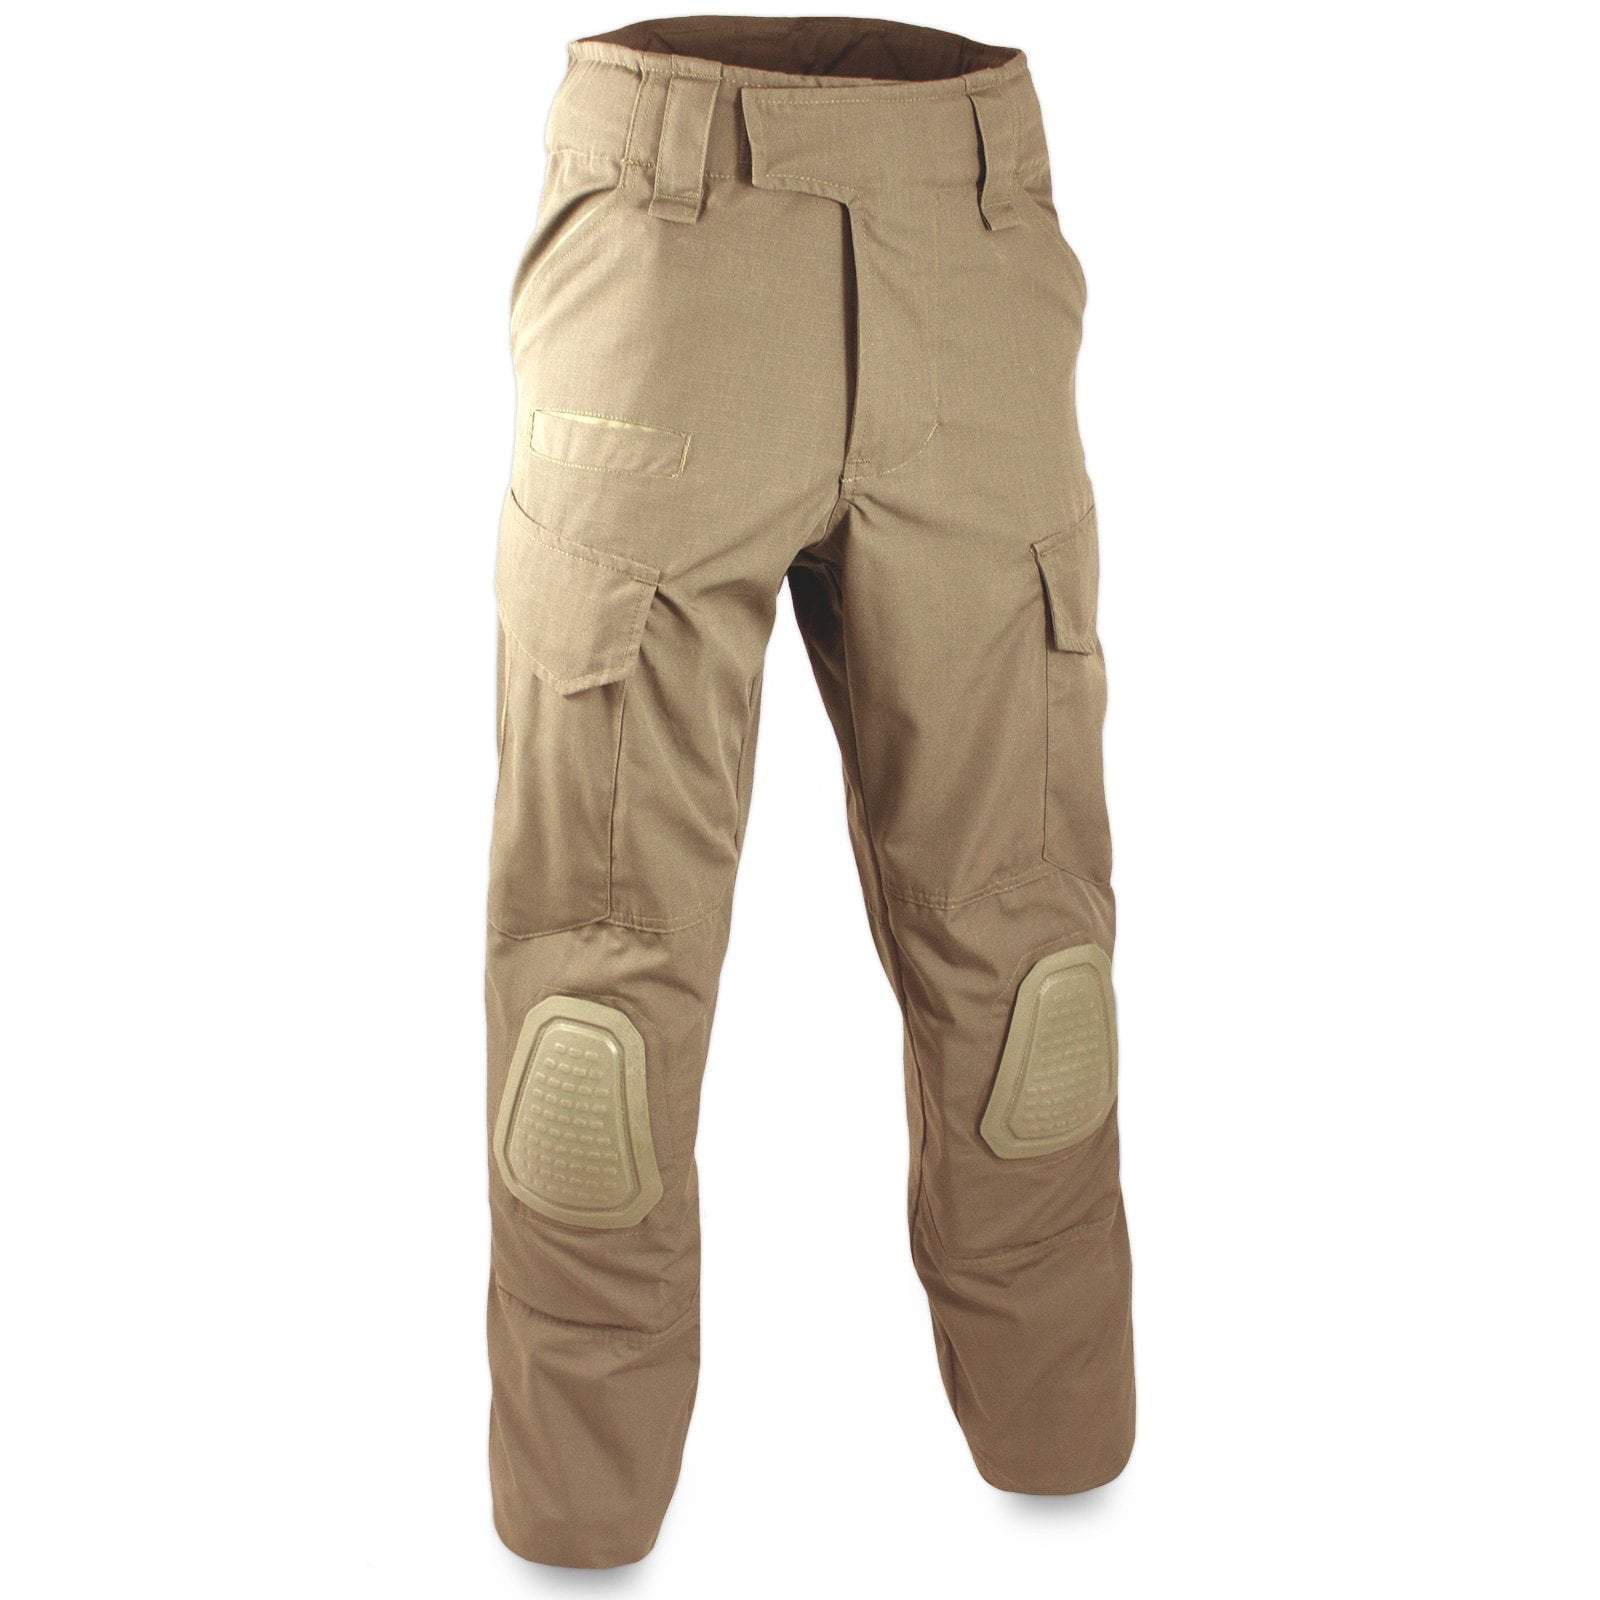 Bulldog Rogue MK2 Cargo Trousers with Knee Pads — UKMCPro.co.uk